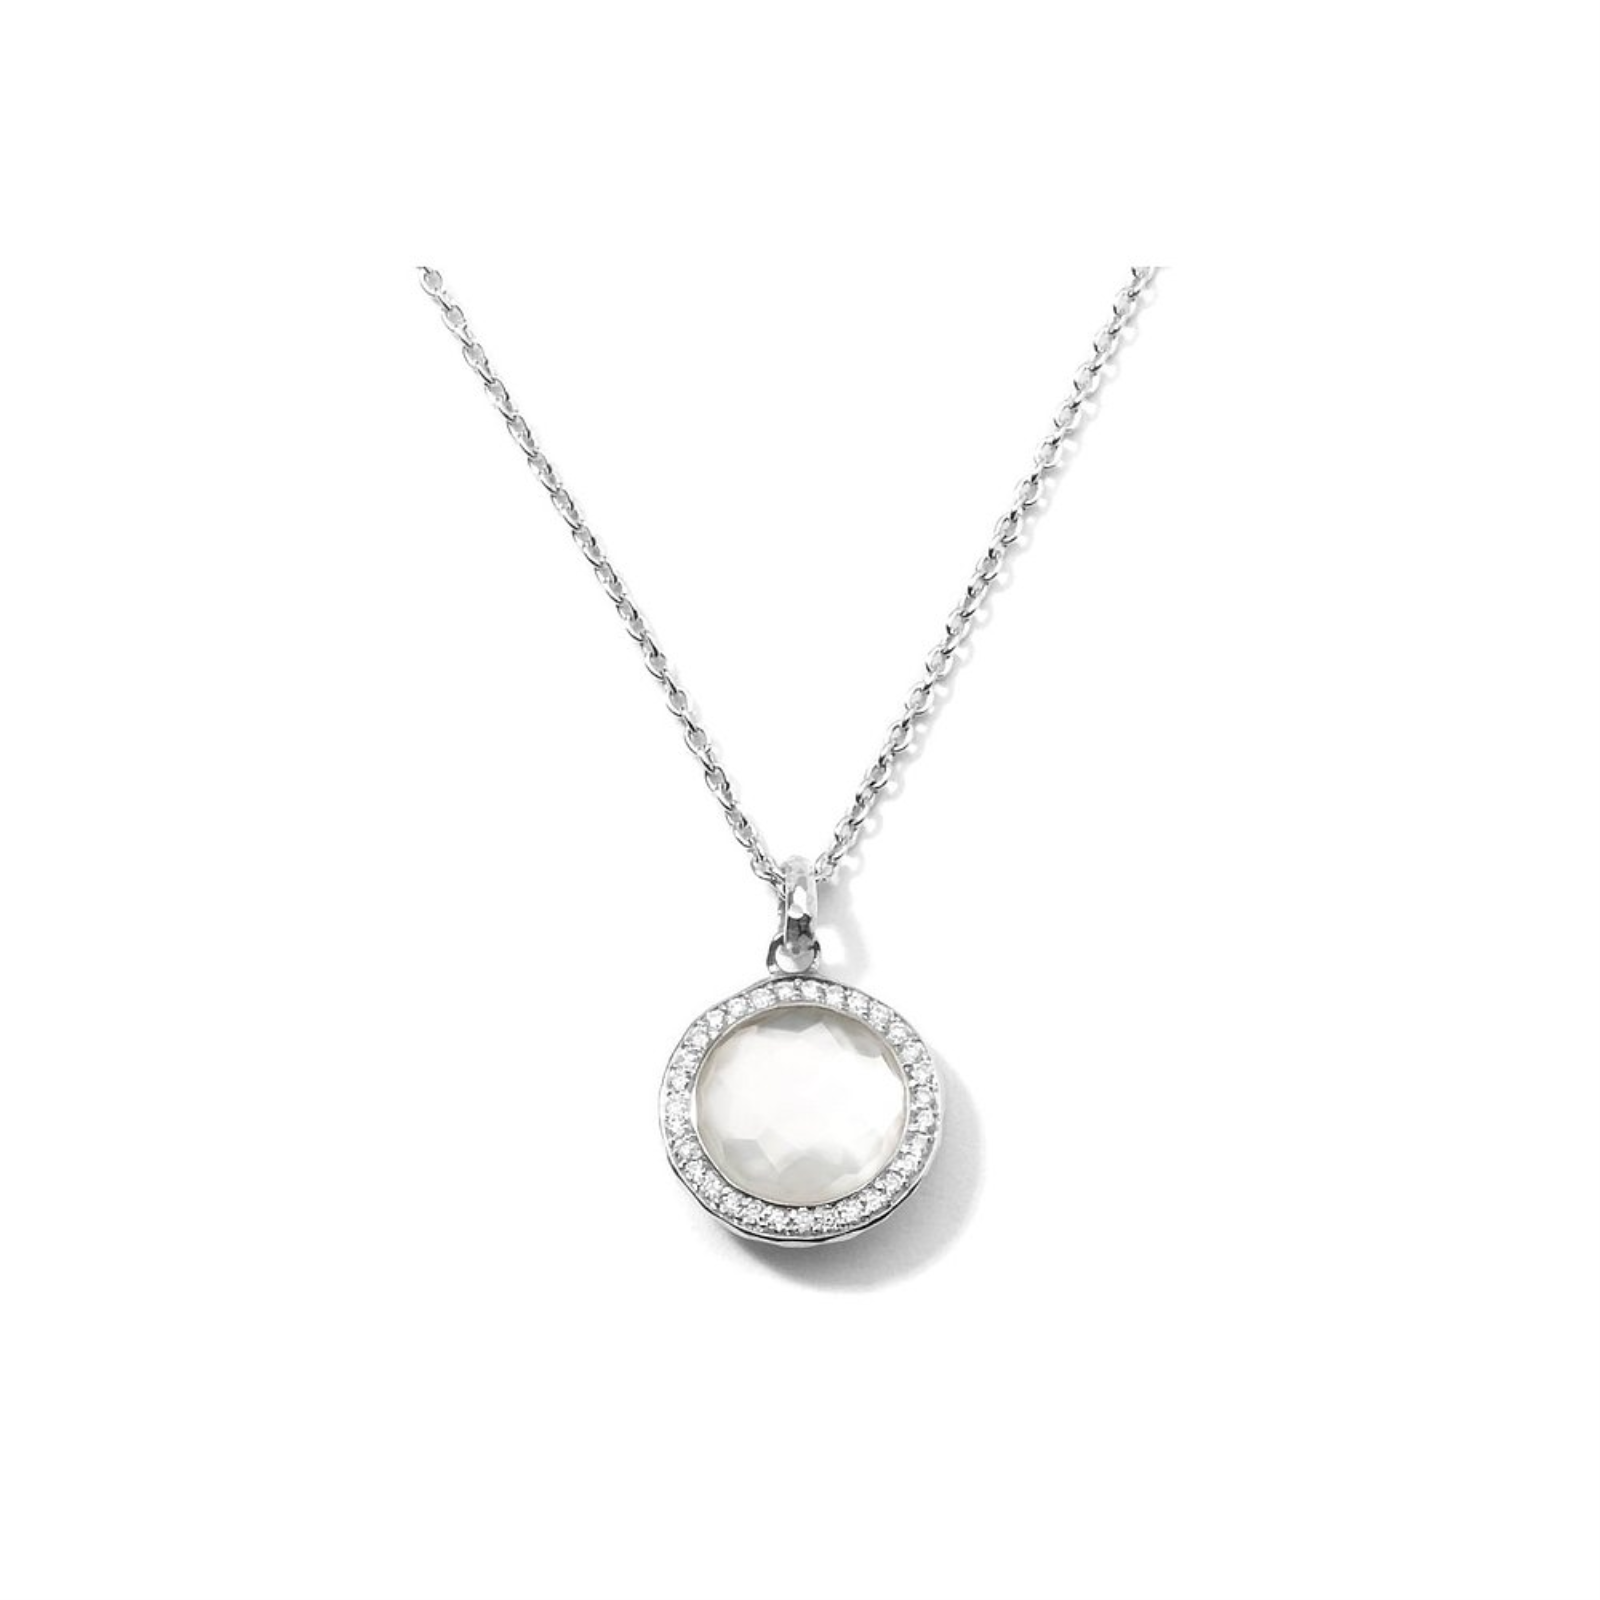 Silver Diamond and Mother of Pearl Mini Pendant Necklace